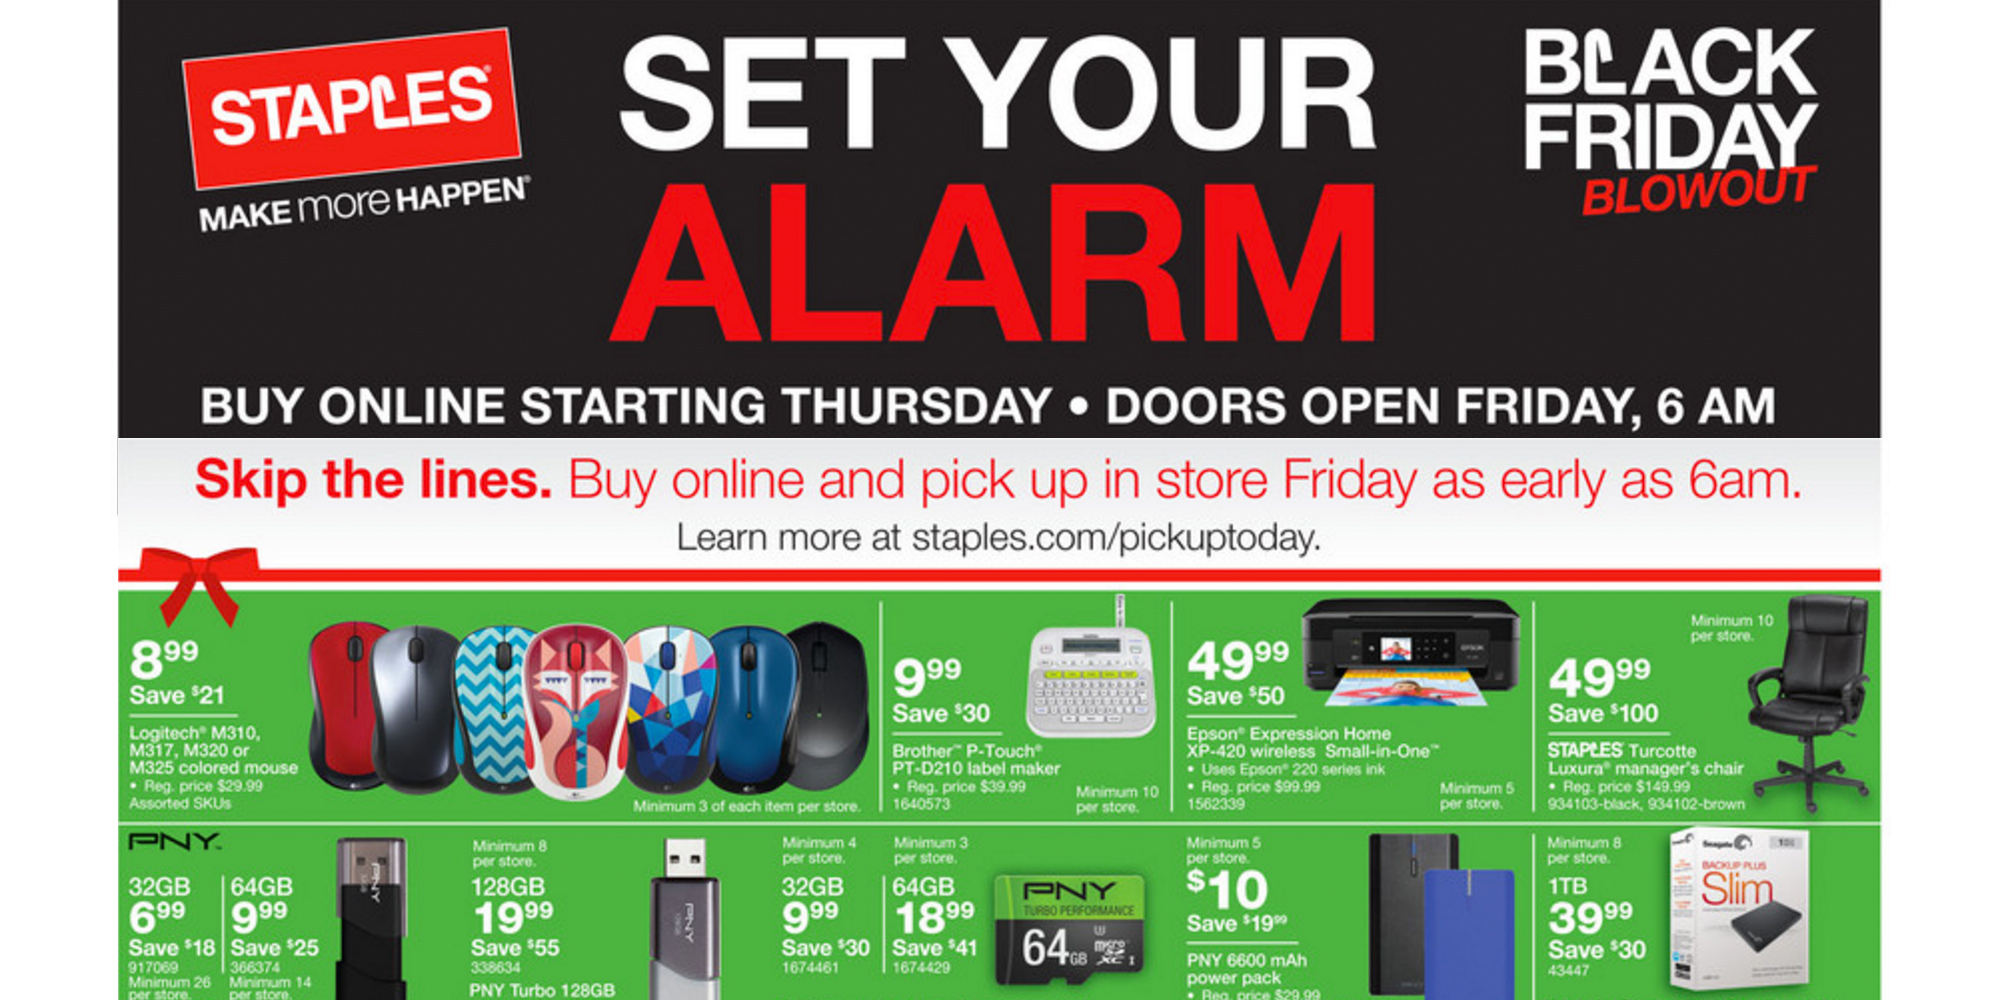 Staples Black Friday Ad Revealed iPad Air 2 from 374, mini 4 299